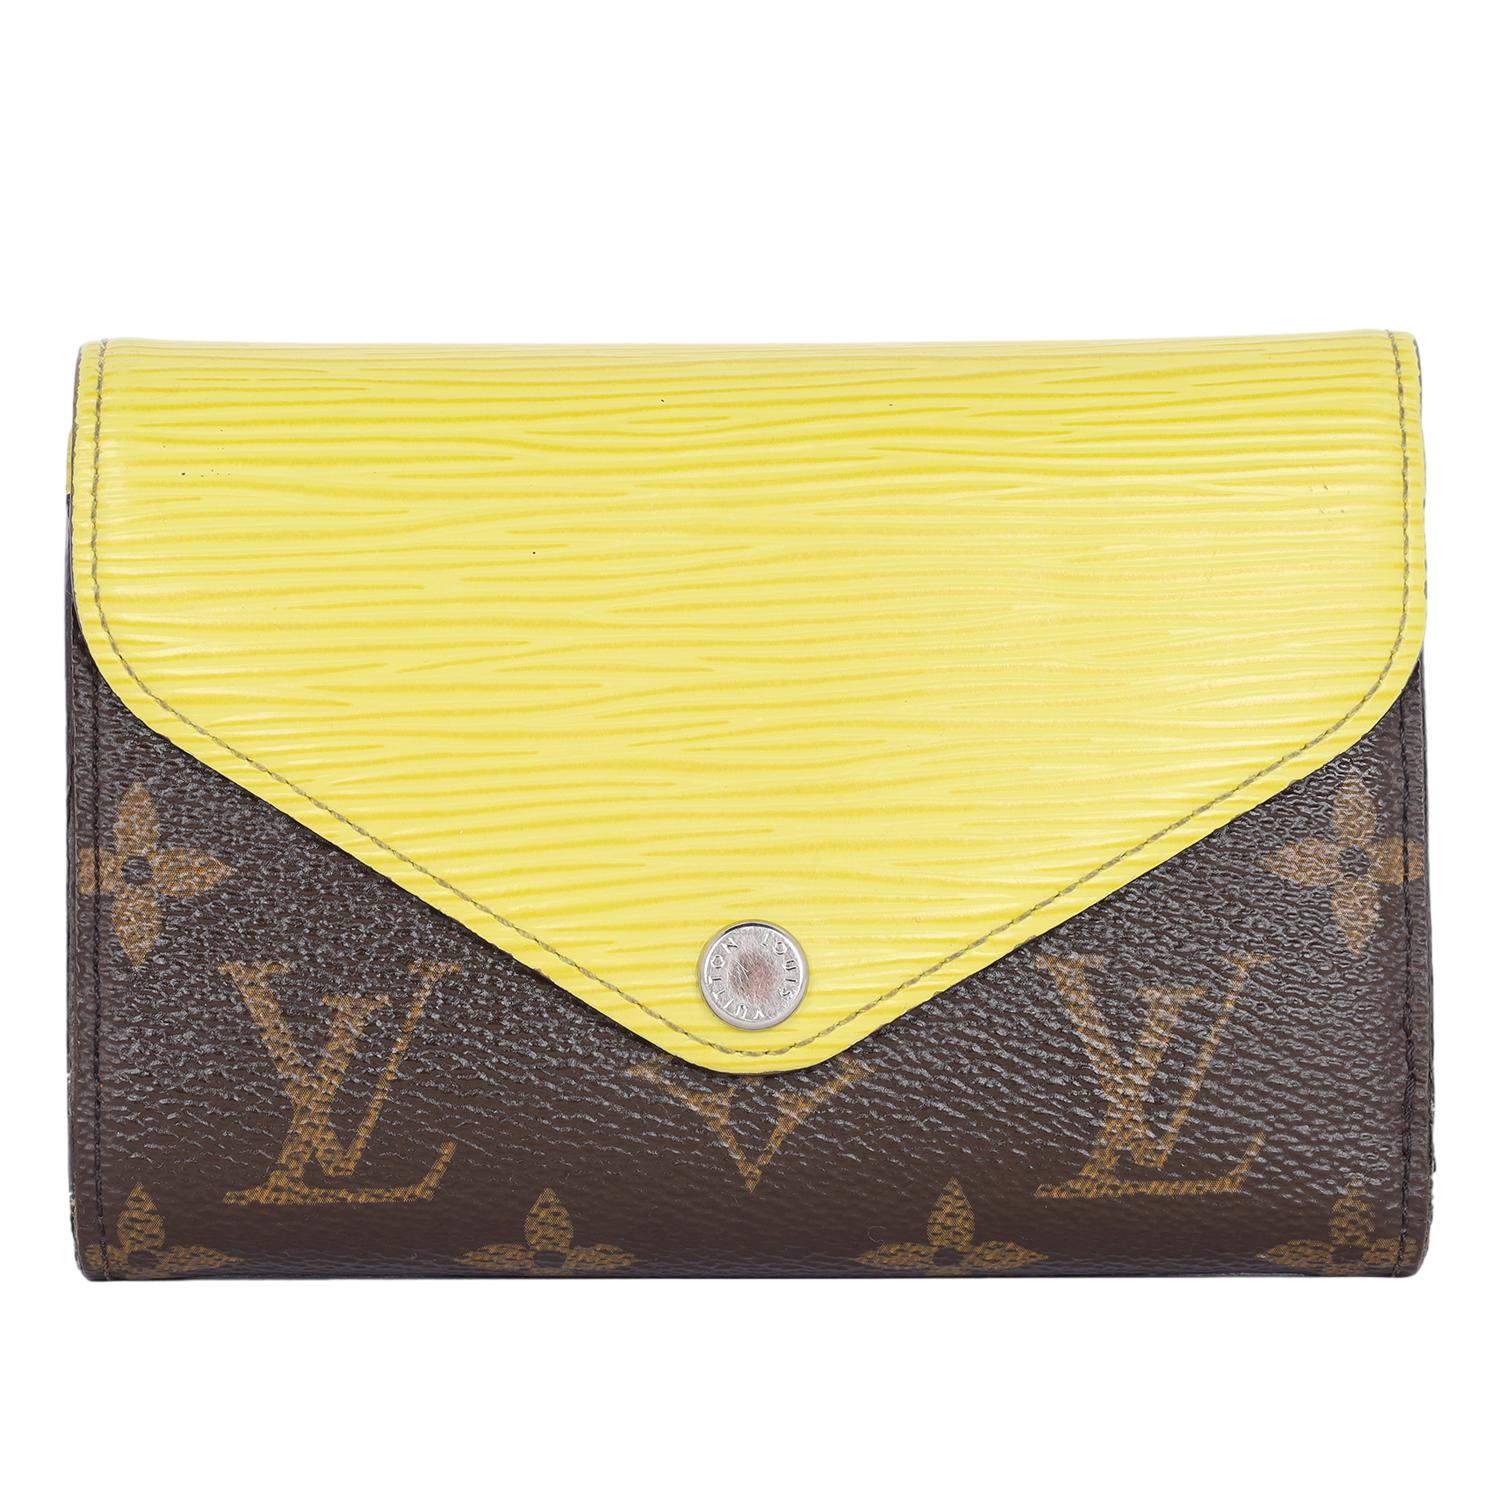 Authentic, pre-loved Louis Vuitton Marie-Lou Compact Epi Monogram Wallet in Pistache yellow. Features a beautiful yellow epi leather with traditional Louis Vuitton monogram coated canvas. The top flap unsnaps to a cross grain leather and monogram